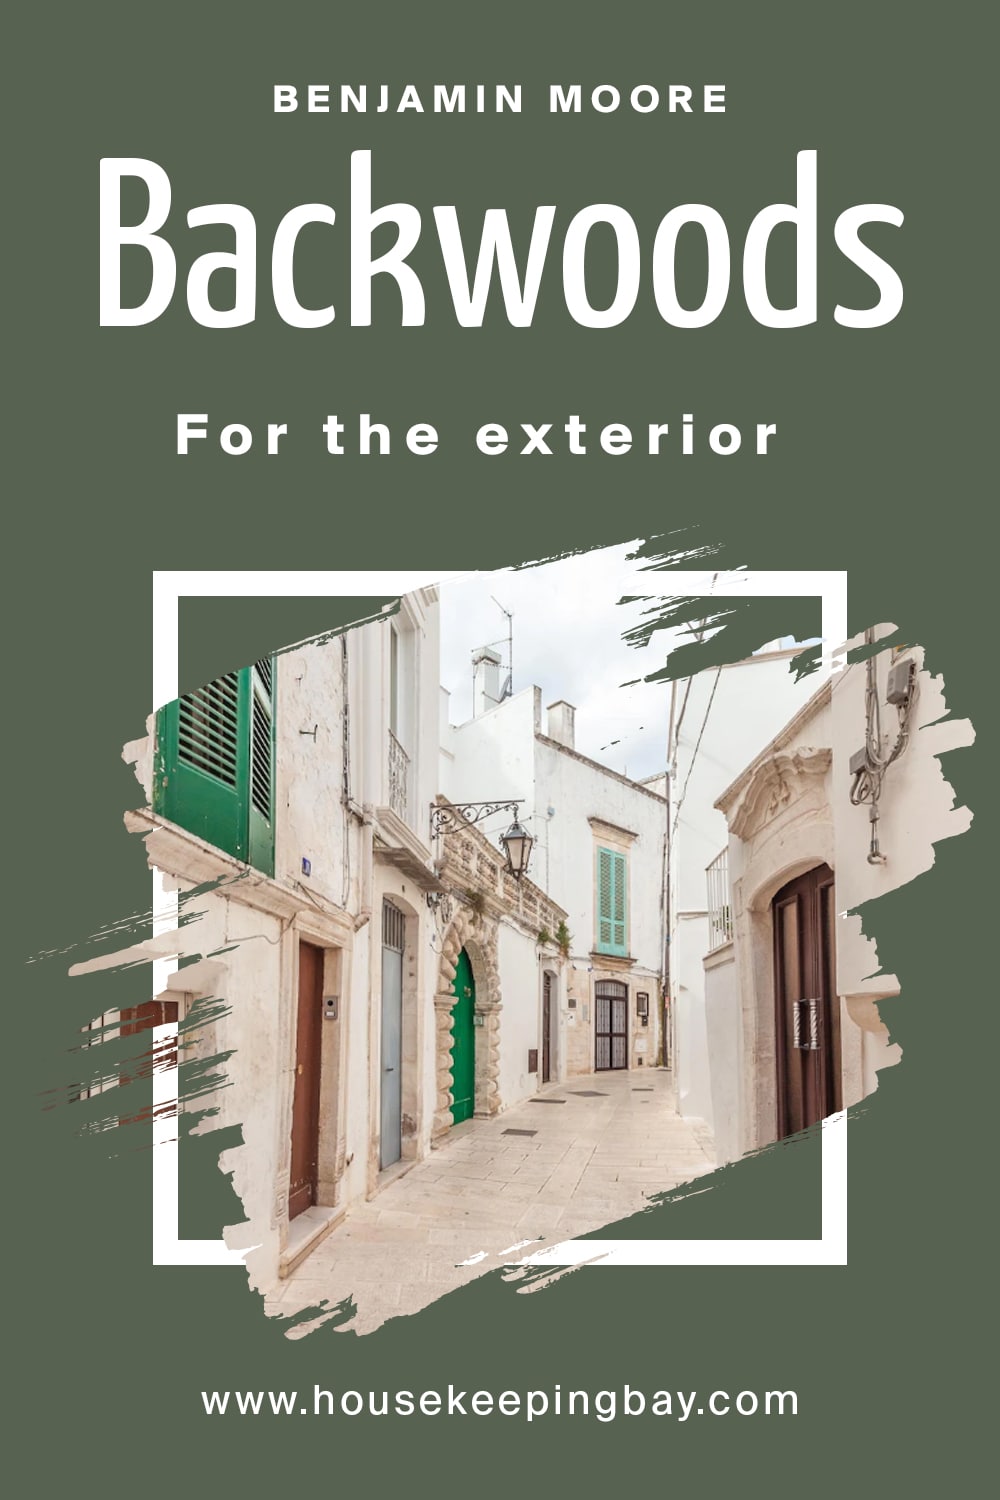 Benjamin Moore. Backwoods for the exterior